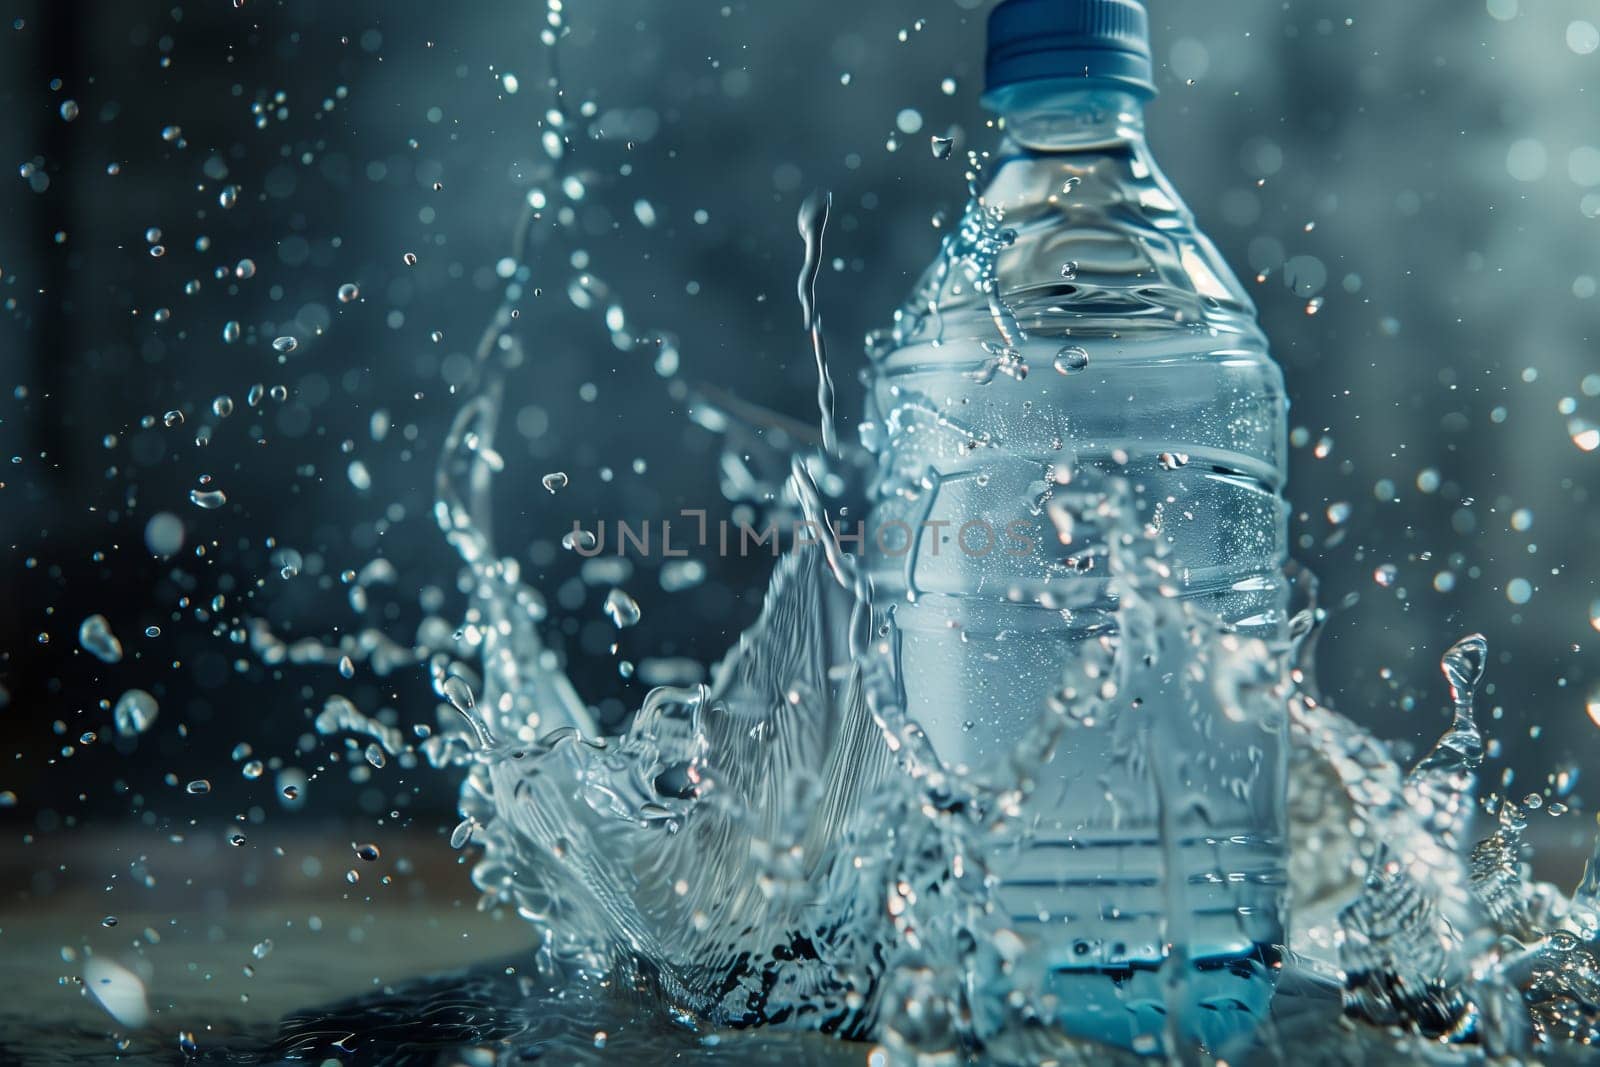 A plastic bottle of water is spilling its liquid contents on a table, creating a small splash. The clear fluid is likely drinking water or mineral water